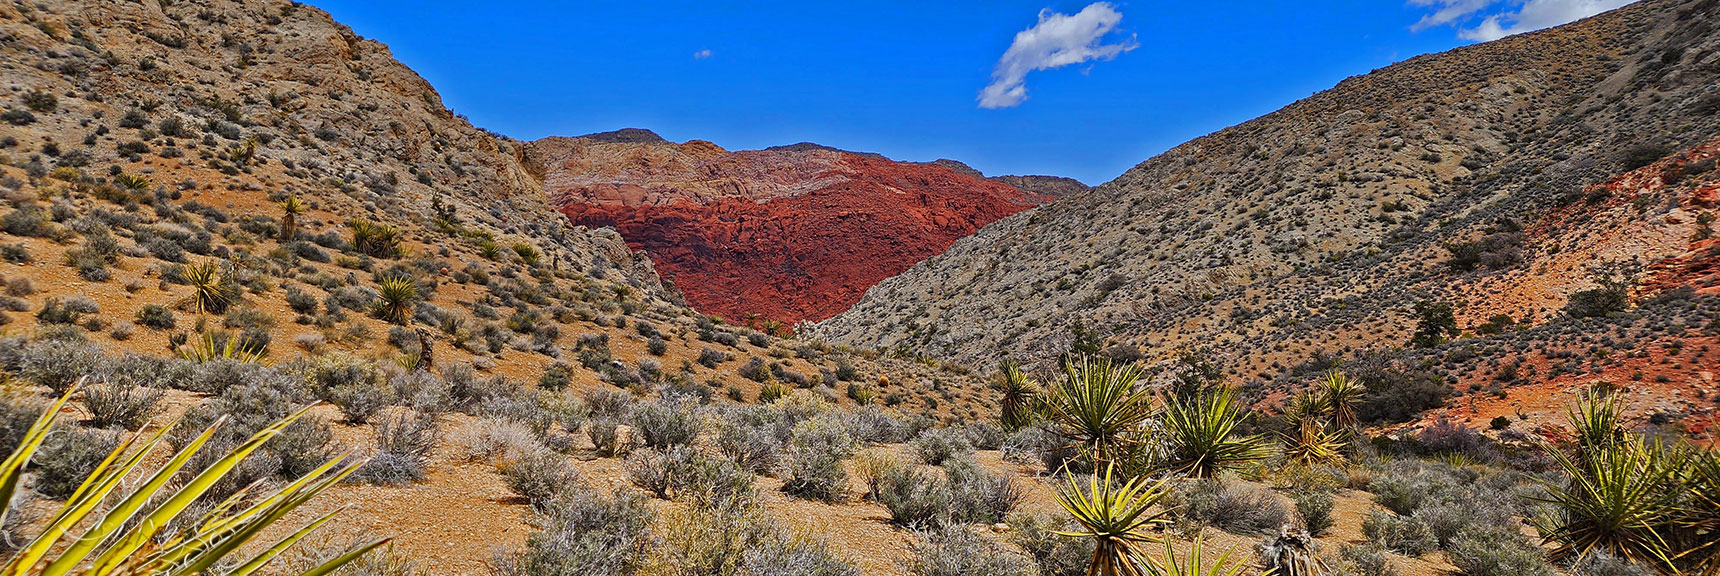 View Down the Descent Canyon Toward Gateway Canyon in Calico Basin | Ash Canyon to Calico Tanks | Calico Basin and Red Rock Canyon, Nevada | David Smith | Las Vegas Area Trails